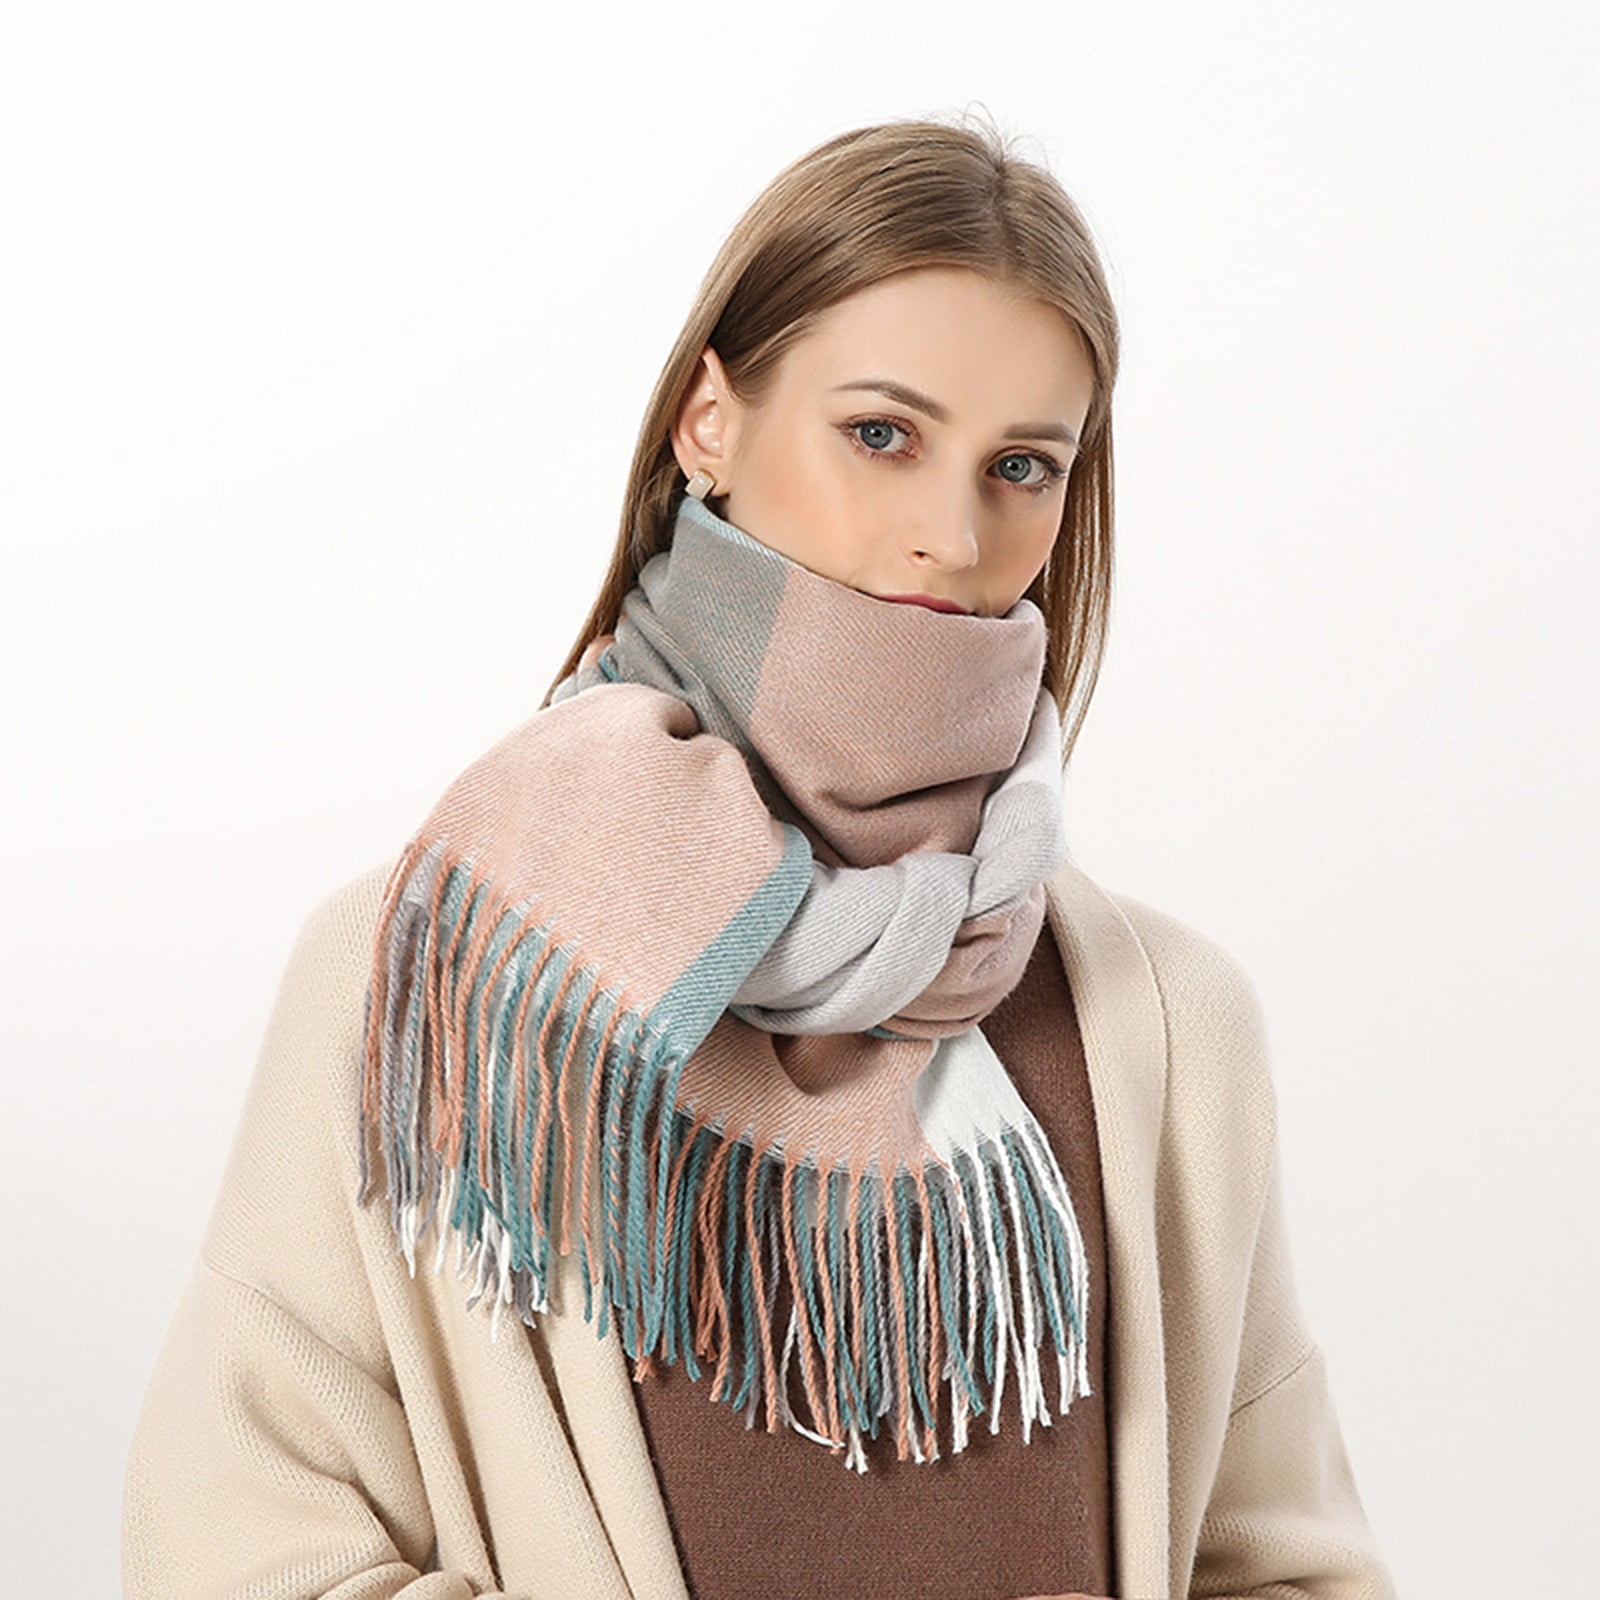  Wanyint Chicken Print Scarfs for Women Fall Scarves